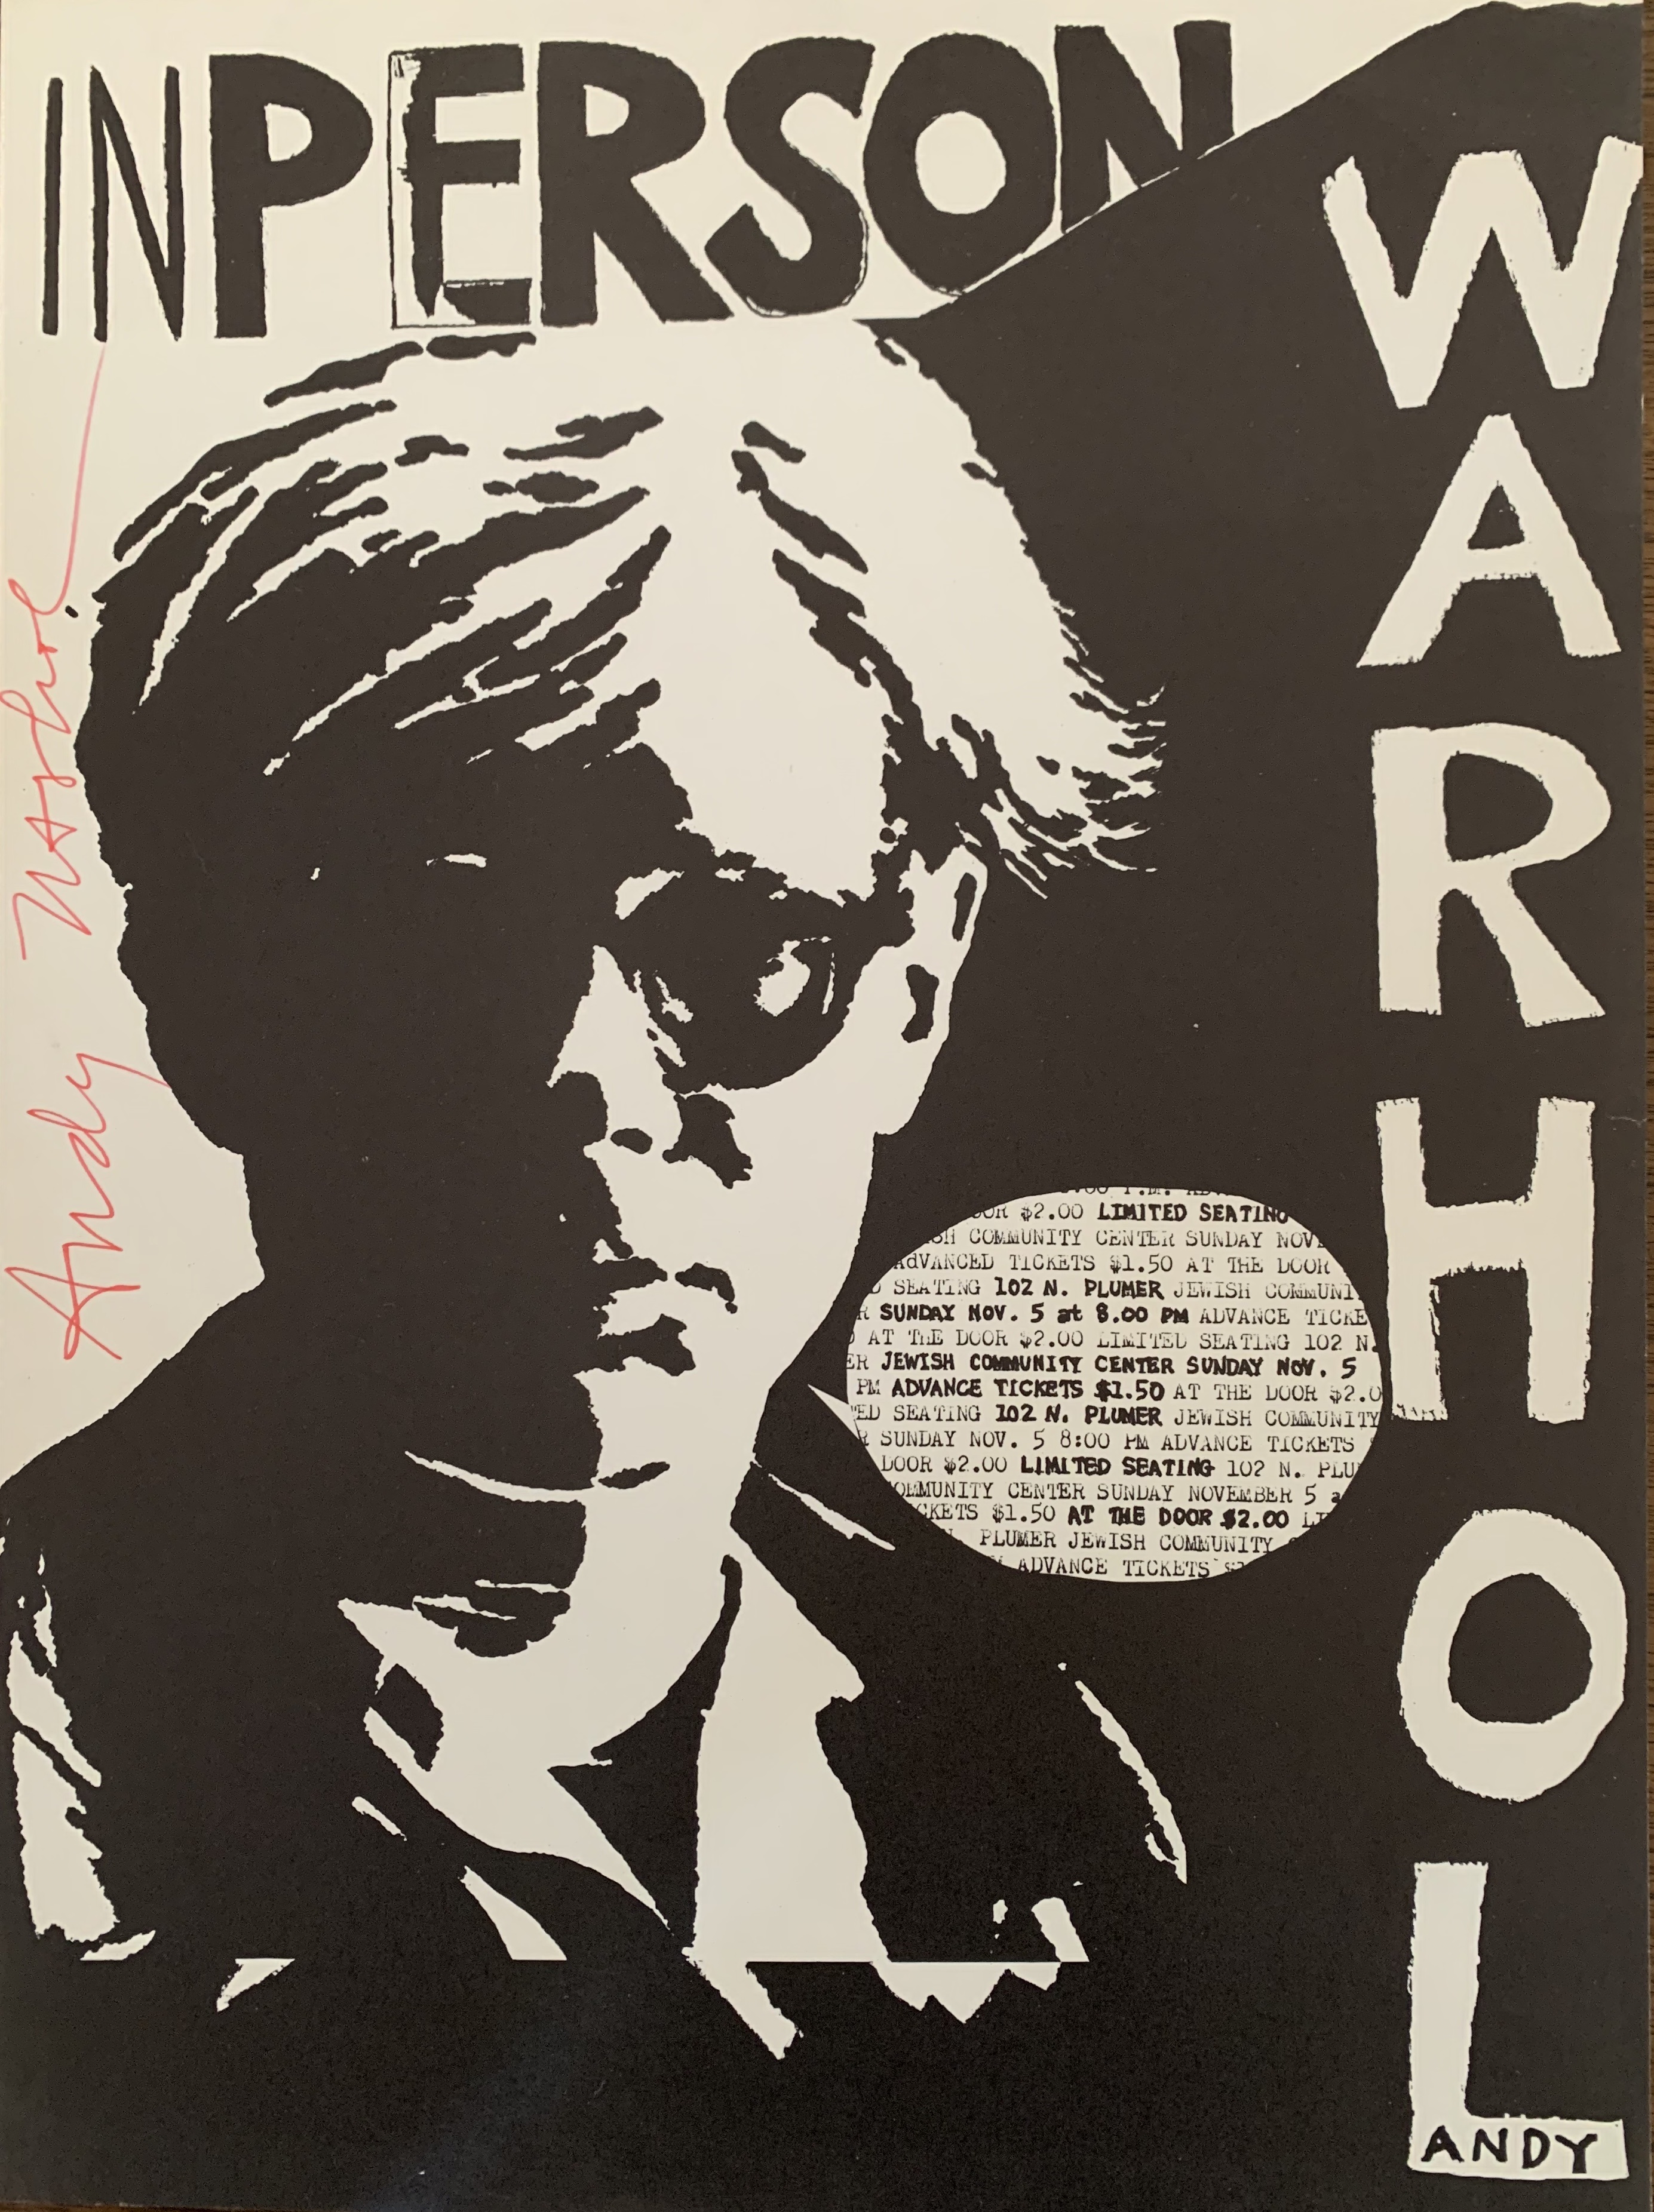 (WARHOL, ANDY). Warhol, Andy - ANDY WARHOL: POSTER FOR A 1967 FILM SCREENING AND PERSONAL APPEARANCE AT THE TUCSON JEWISH COMMUNITY CENTER - BOLDLY SIGNED BY THE ARTIST